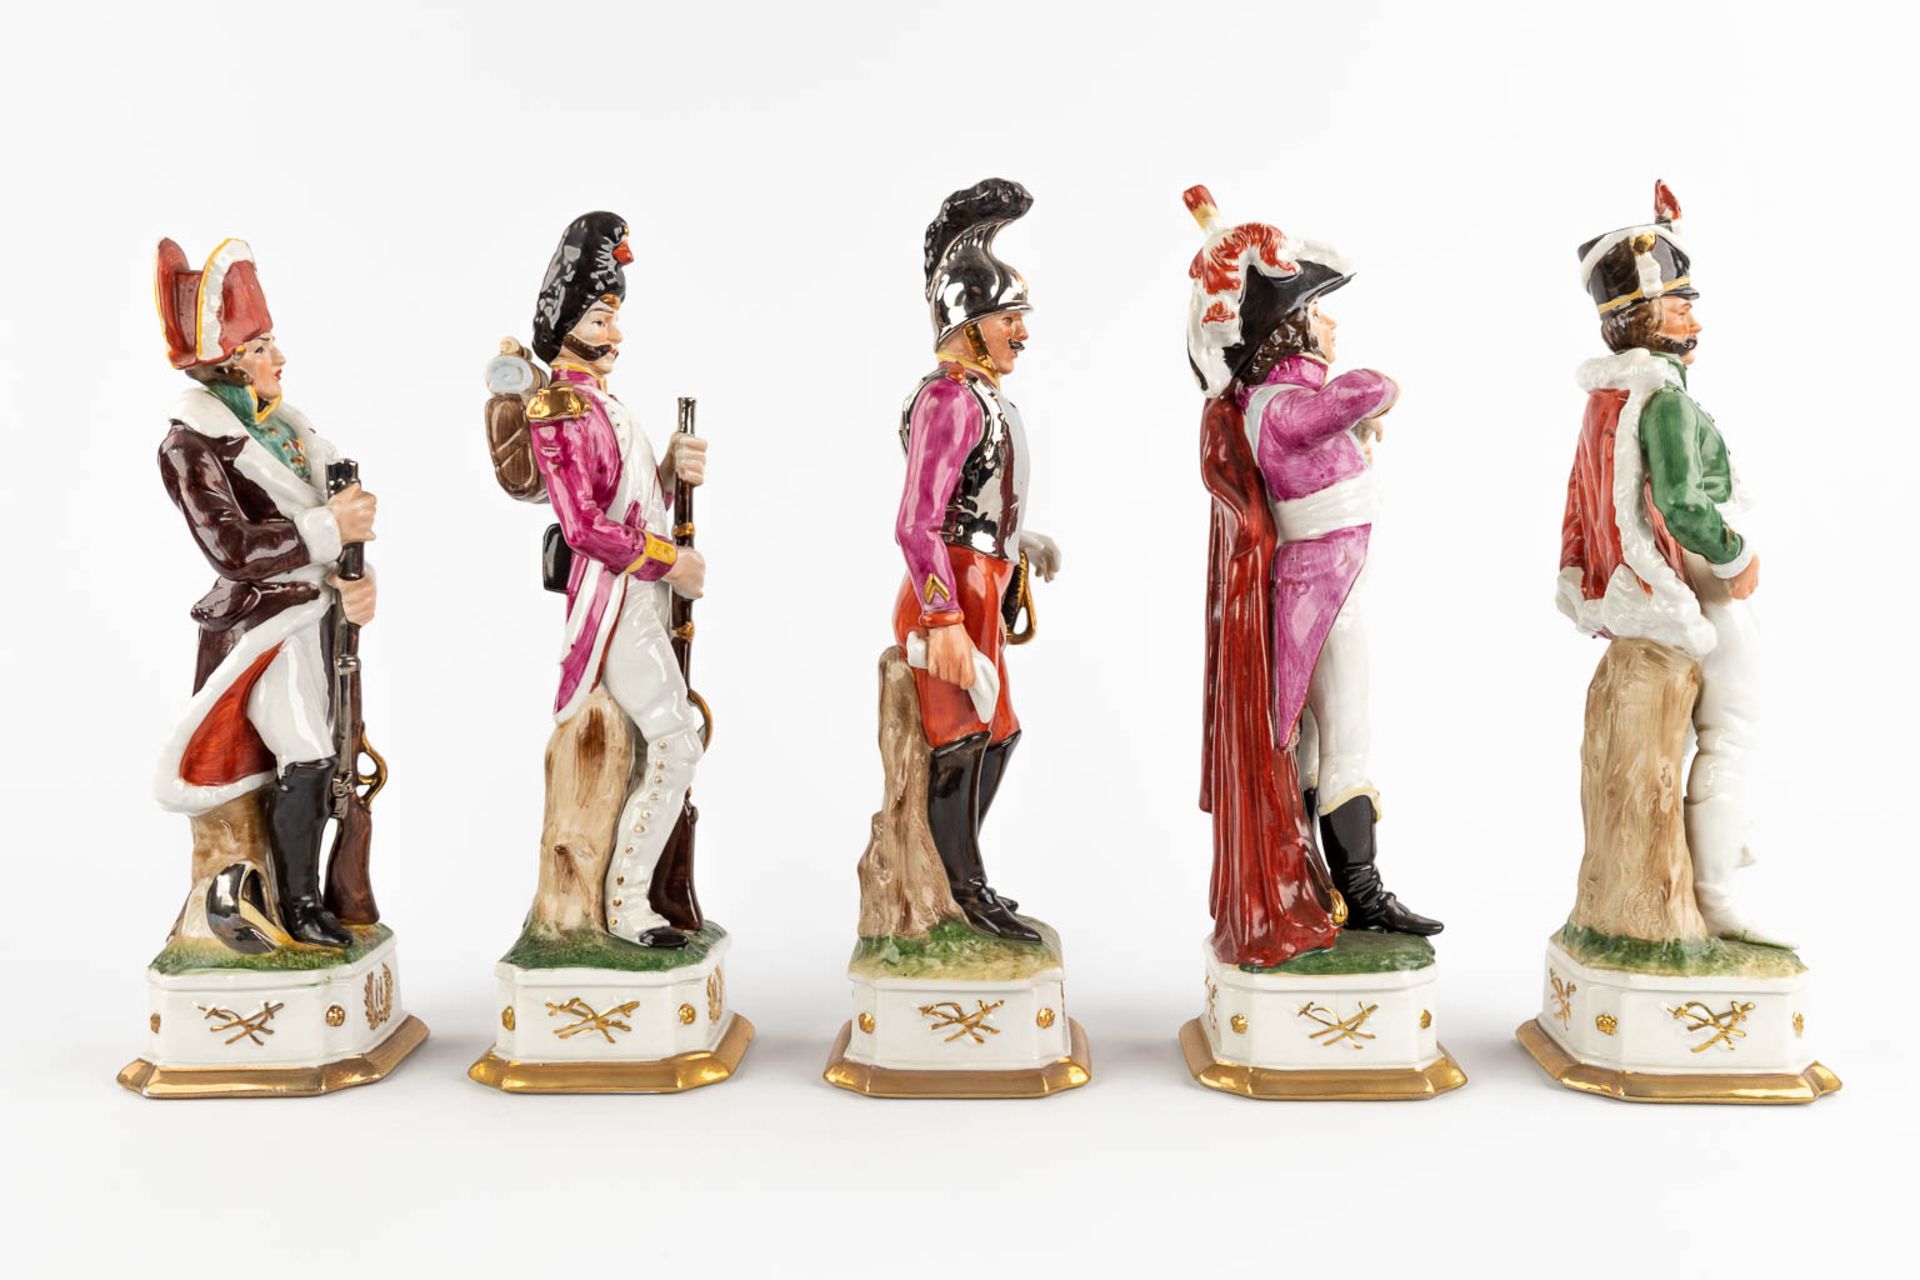 Napoleon and 9 generals, polychrome porcelain. 20th C. (H:32 cm) - Image 7 of 15